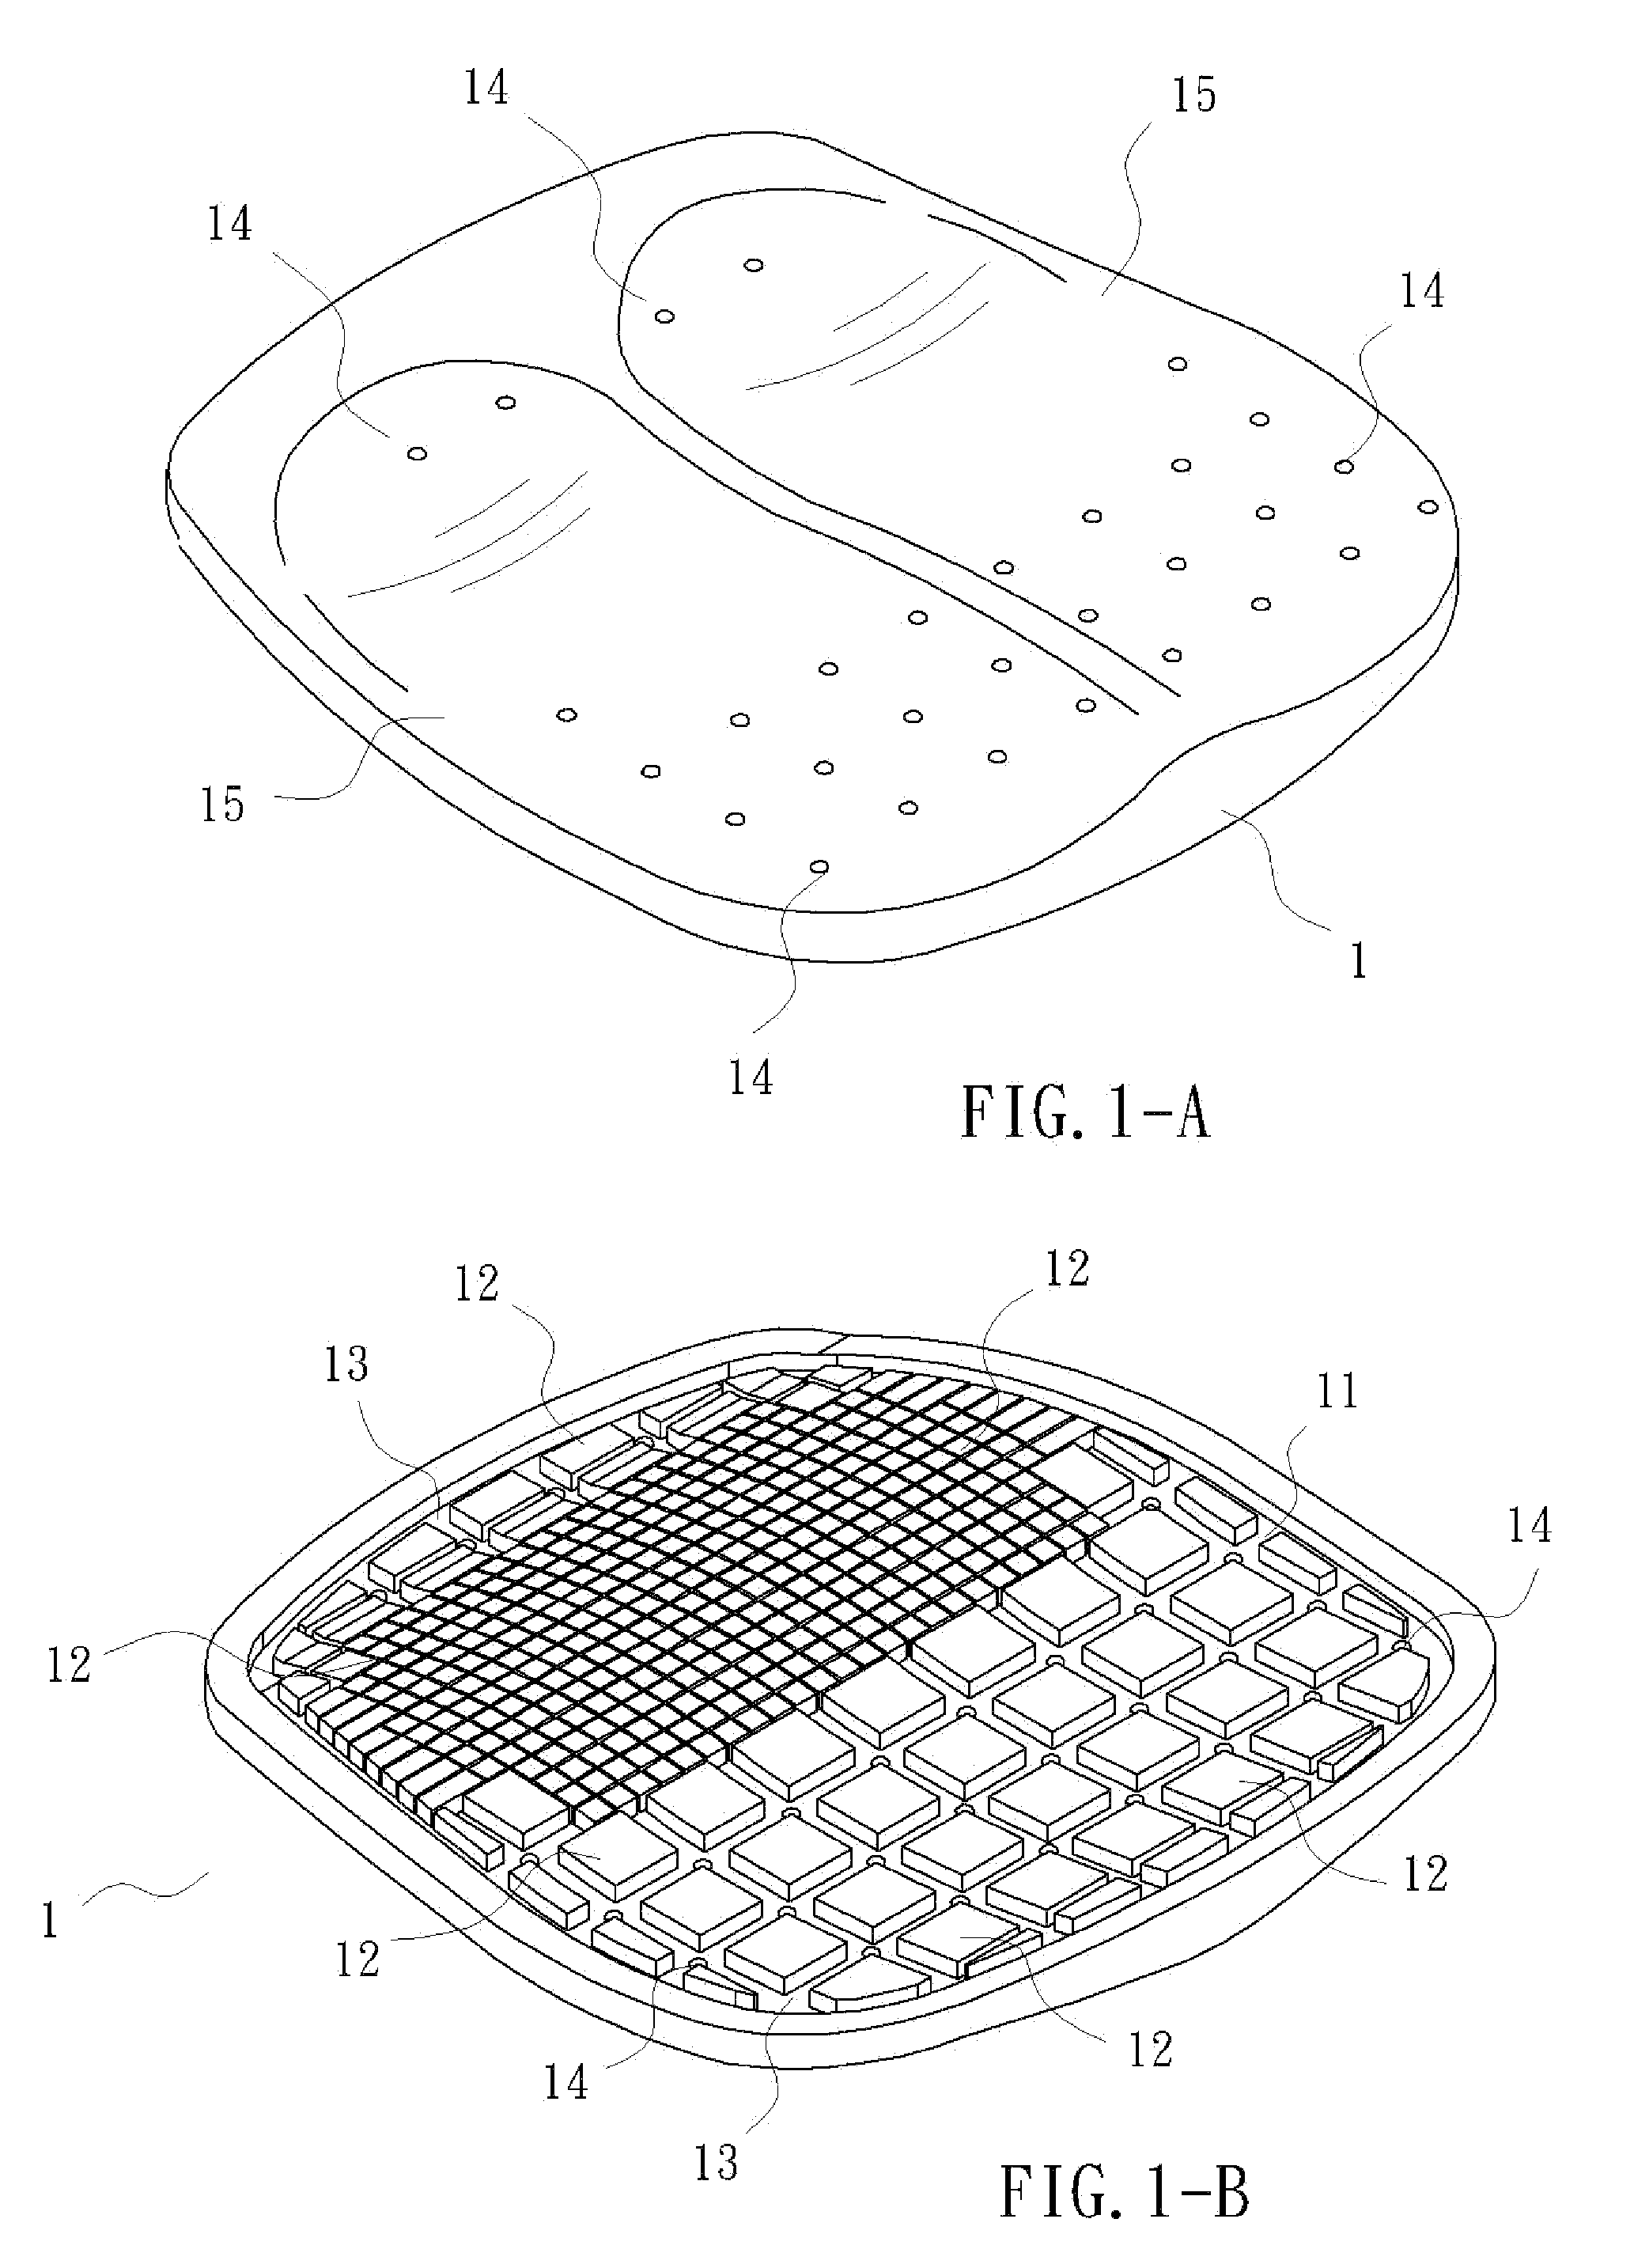 Seat cushion structure